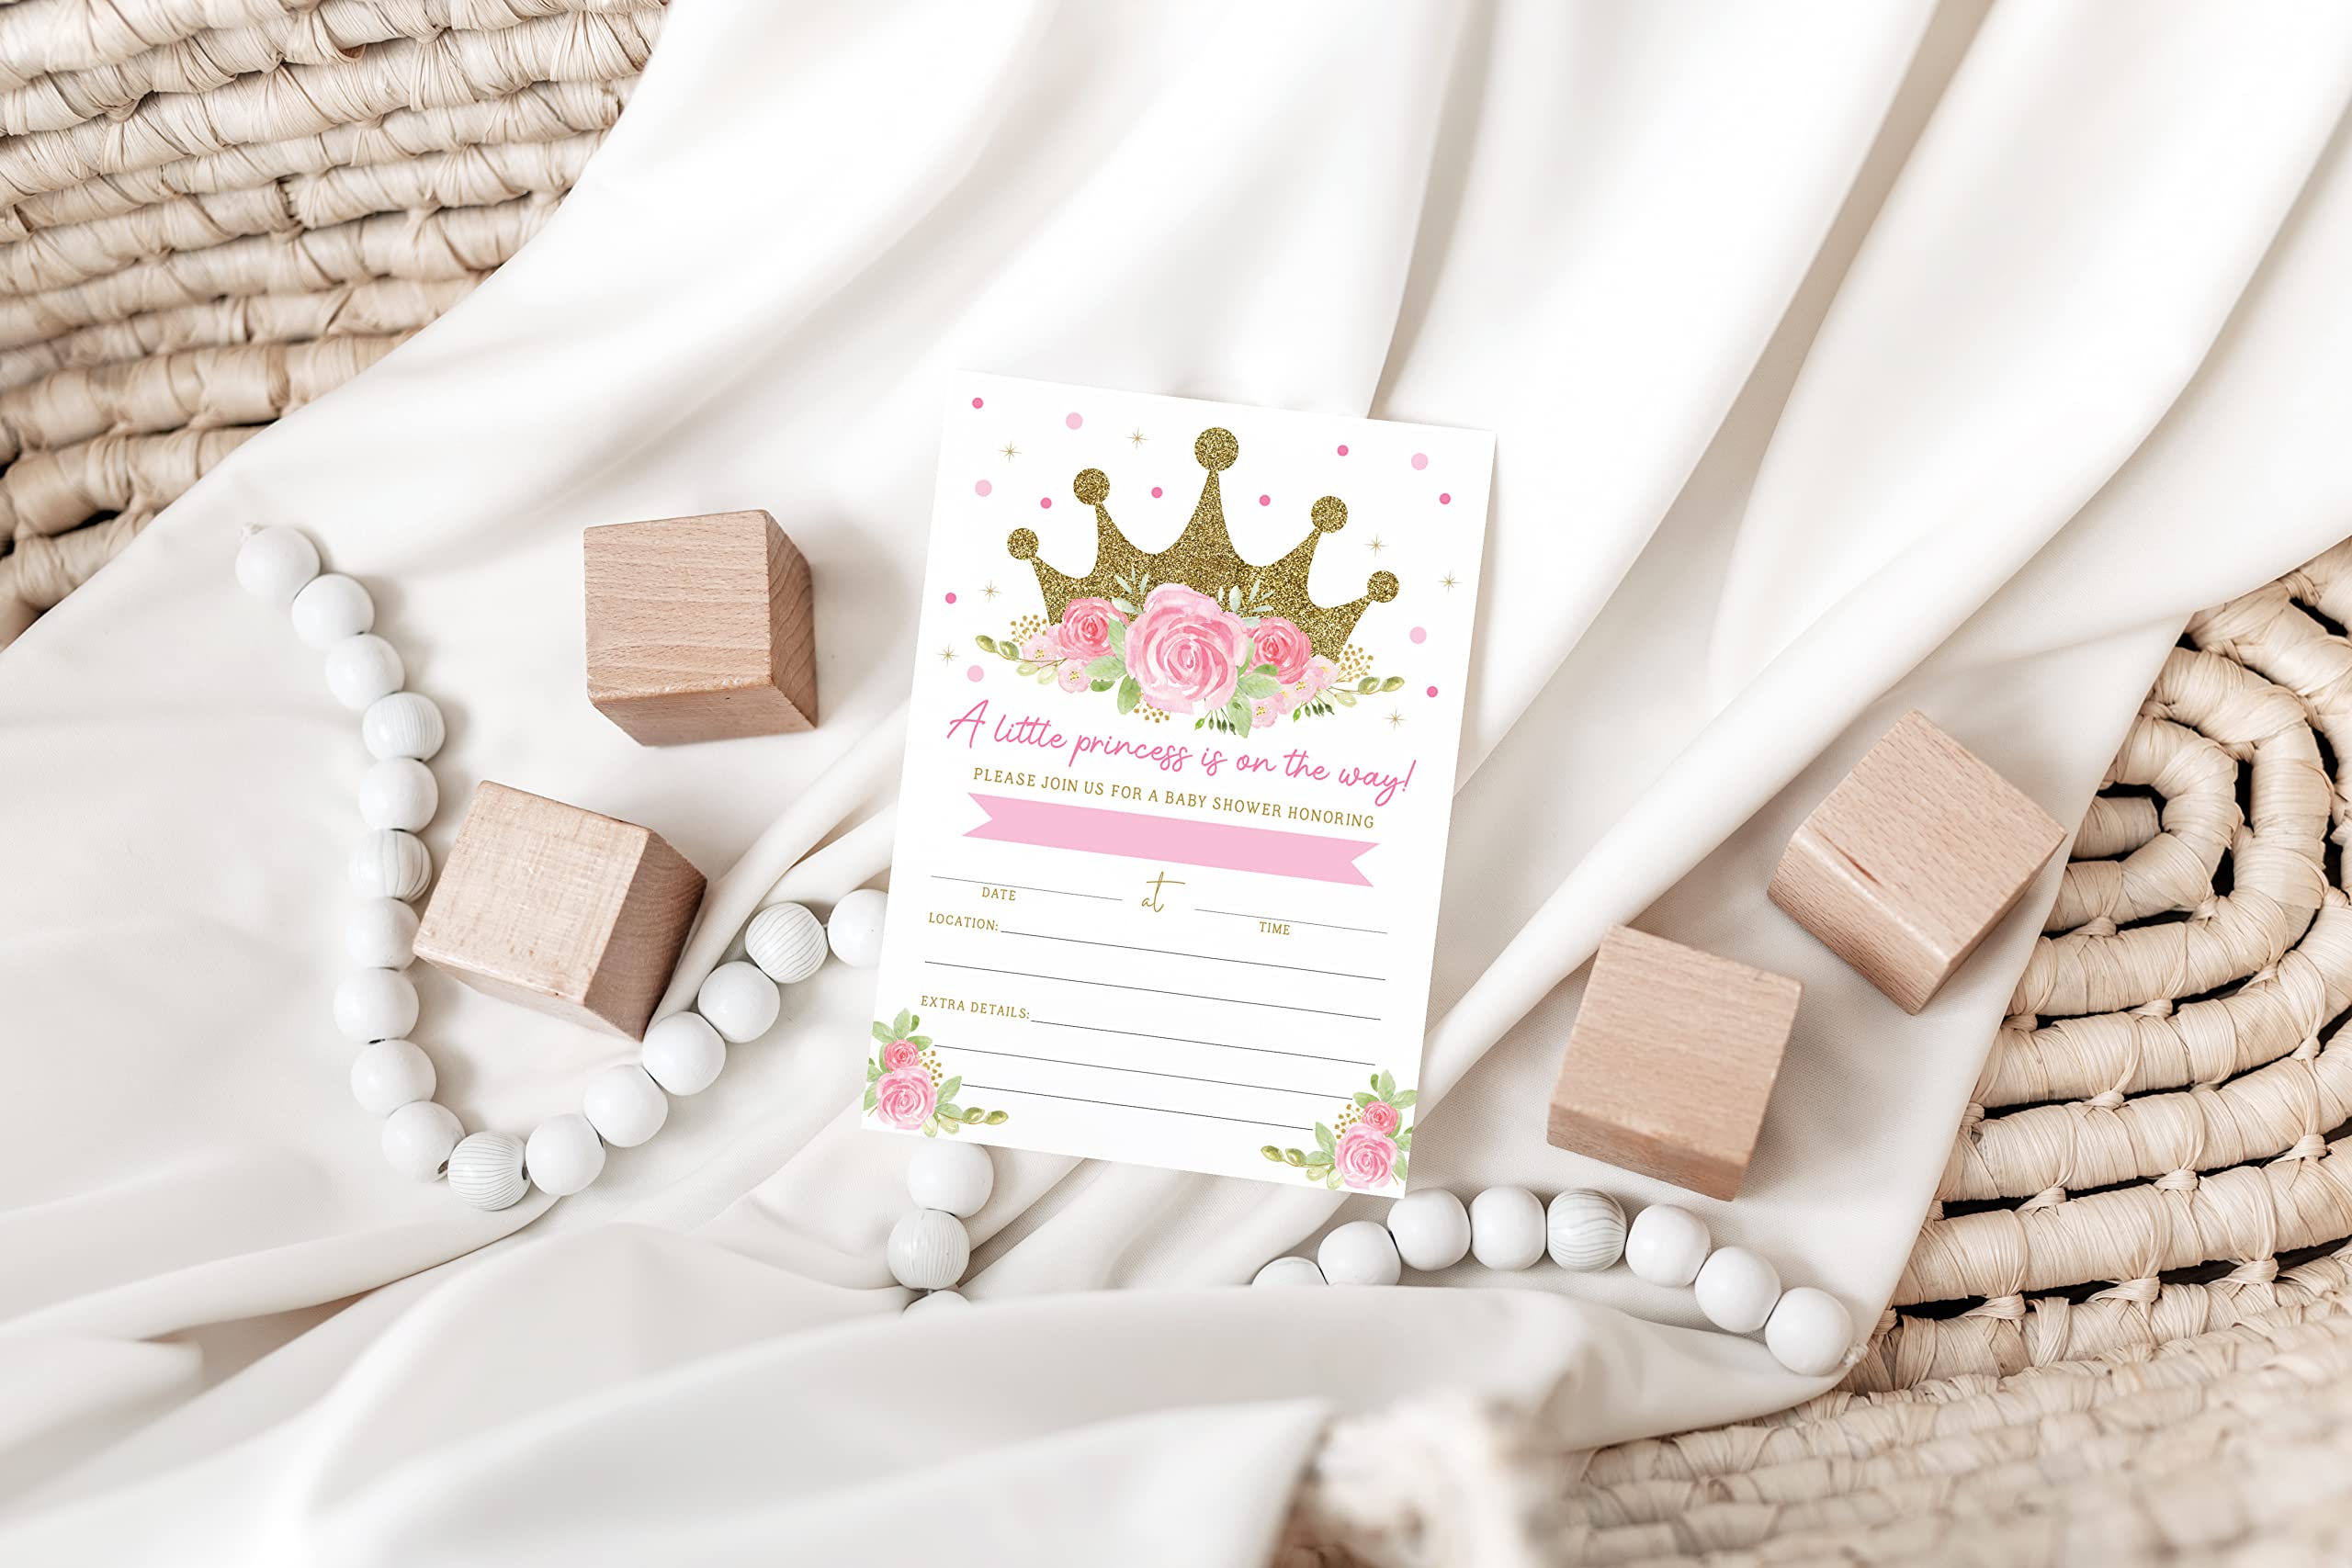 Princess Baby Shower Invitations with Book Request and Diaper Raffle Card, Pink Baby Sprinkle, 20 Fill in Invites